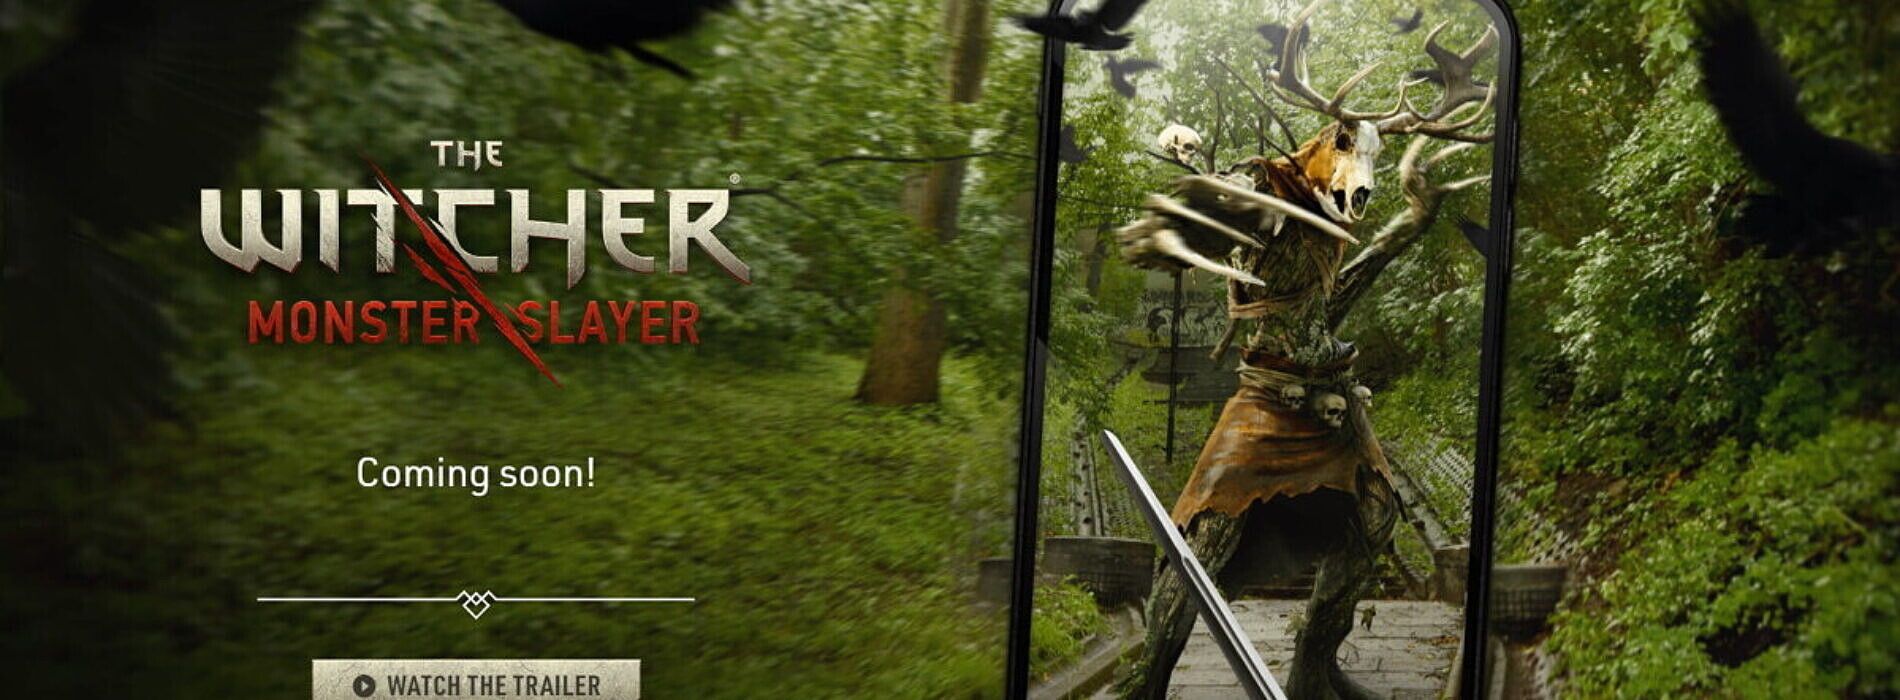 The Witcher: Monster Slayer will add the AR twist to the Witcher series on Android